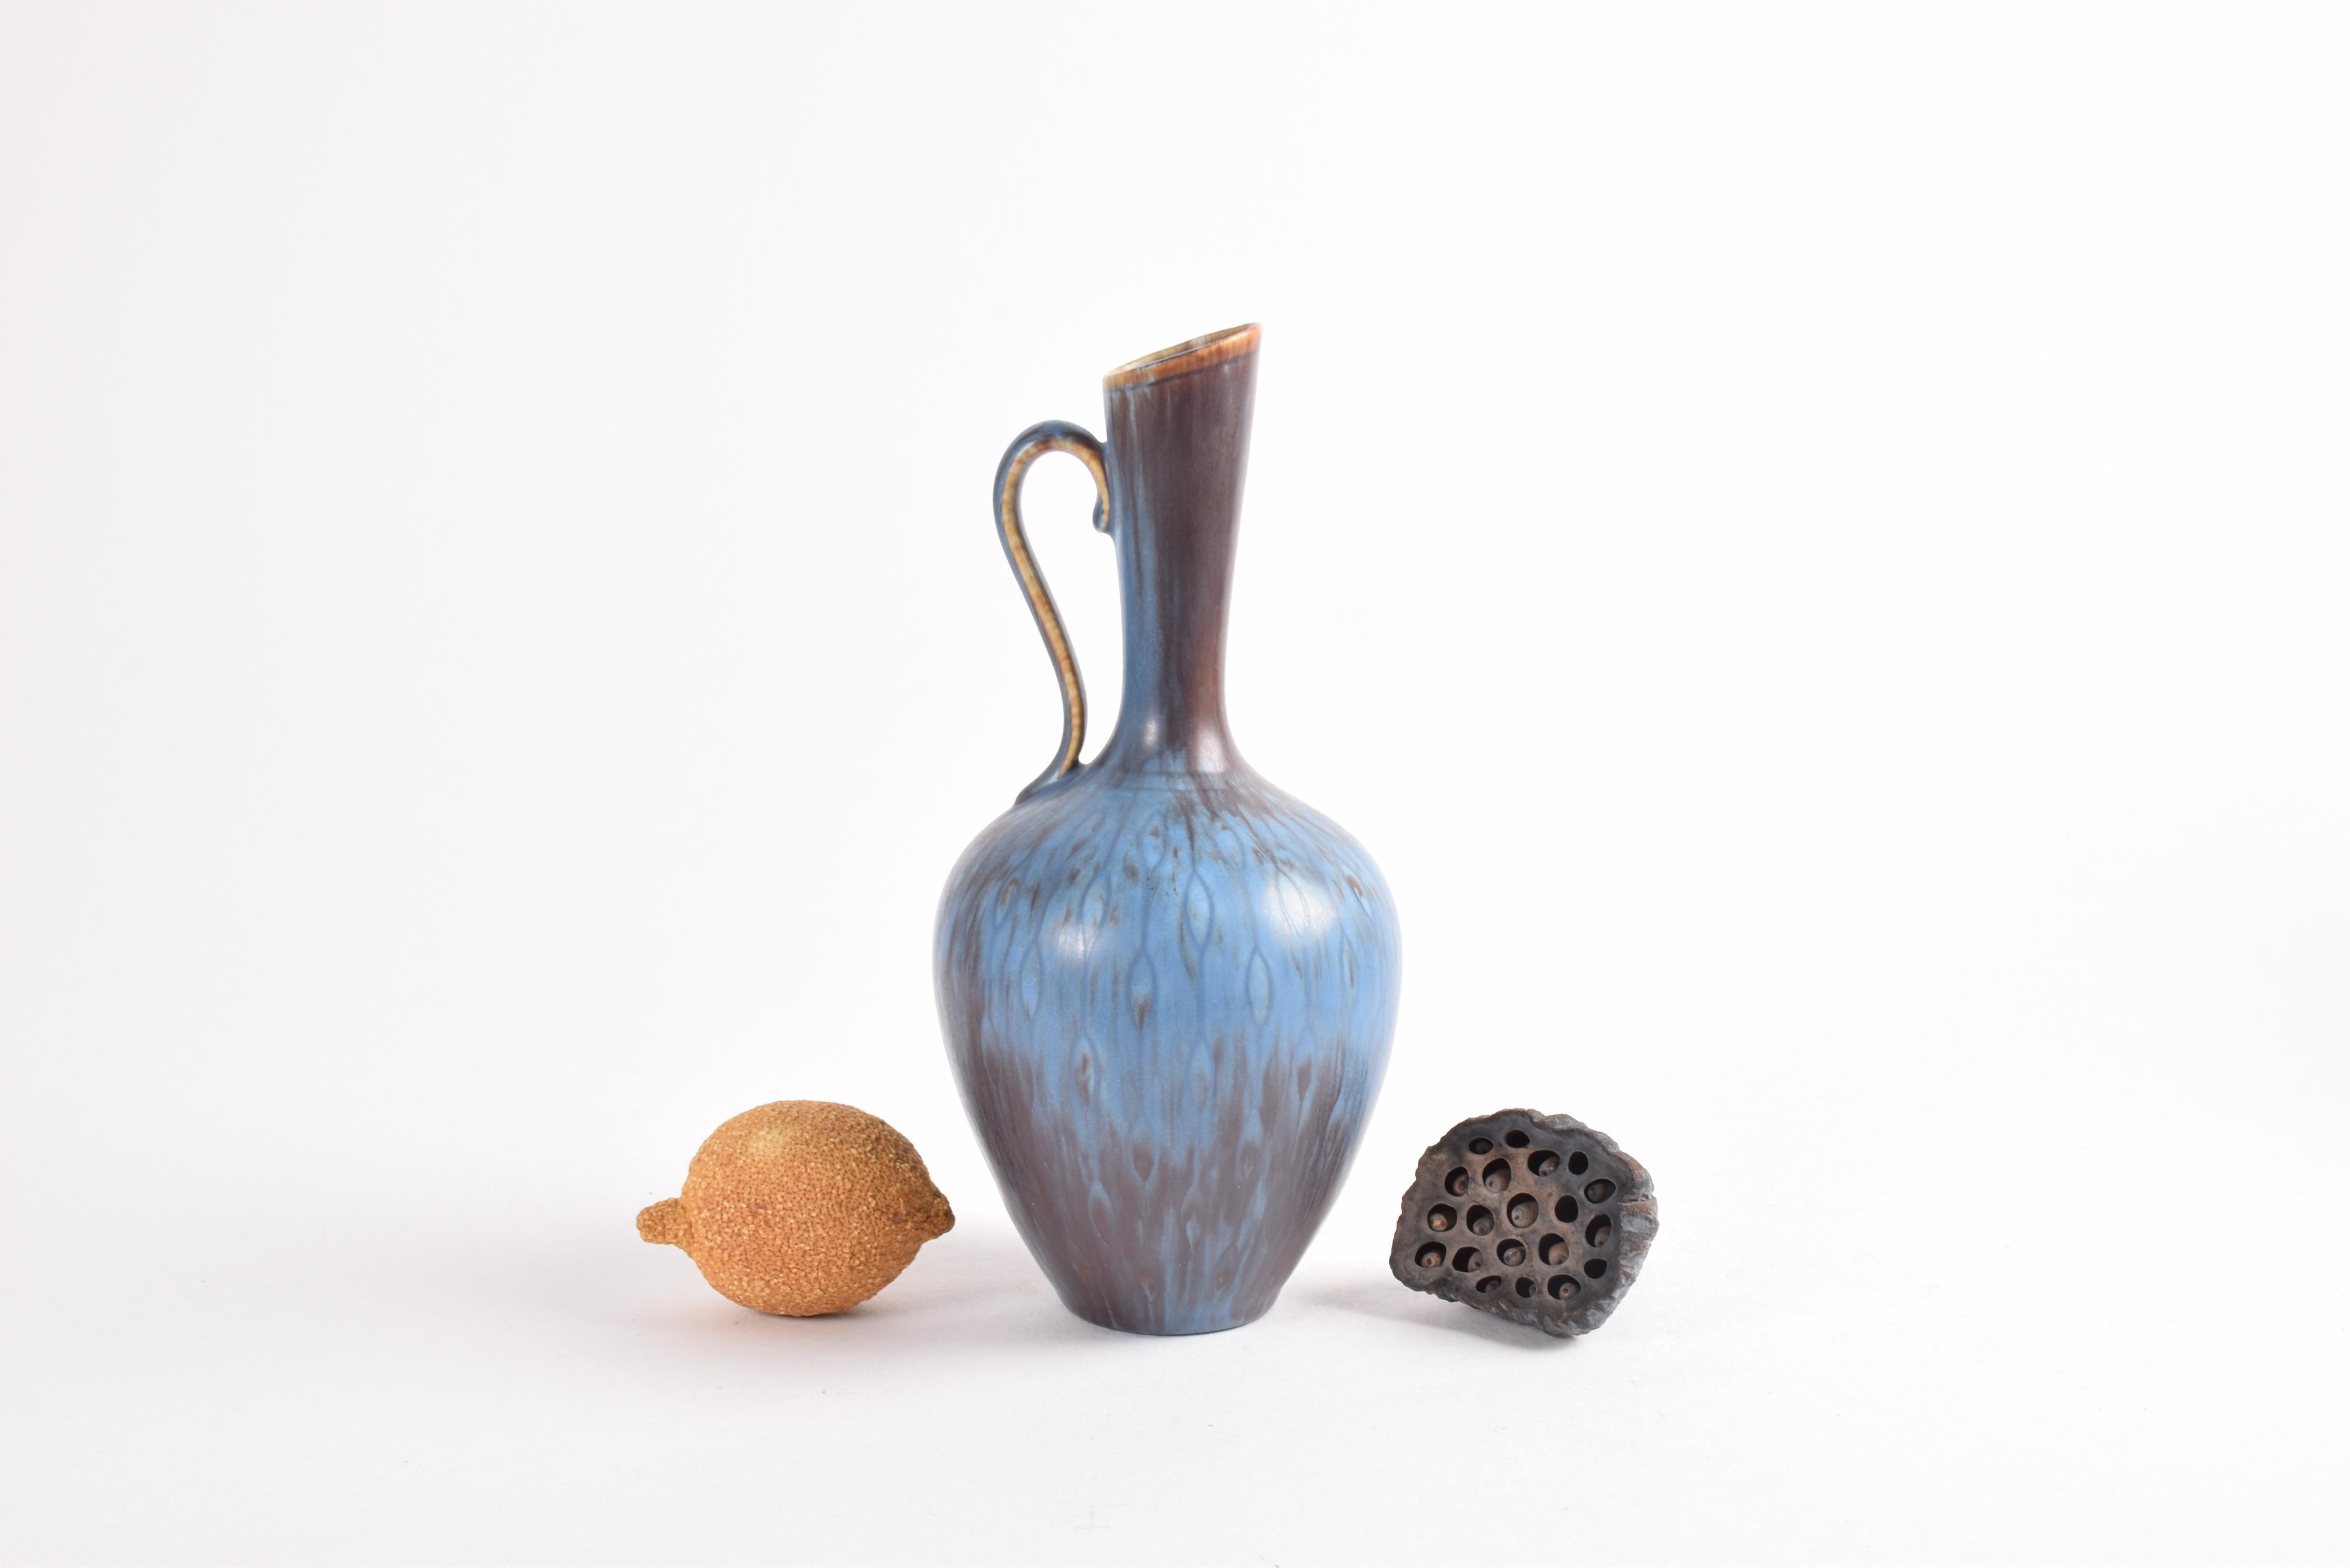 Elegant pitcher vase by Swedish designer Gunnar Nylund (1904-97) for Rörstrand, Sweden. Made ca 1950s to 1960s.

The vase is decorated with glaze in blue and brown / aubergine upon an incised pattern of teardrops in chains.

The vase is fully